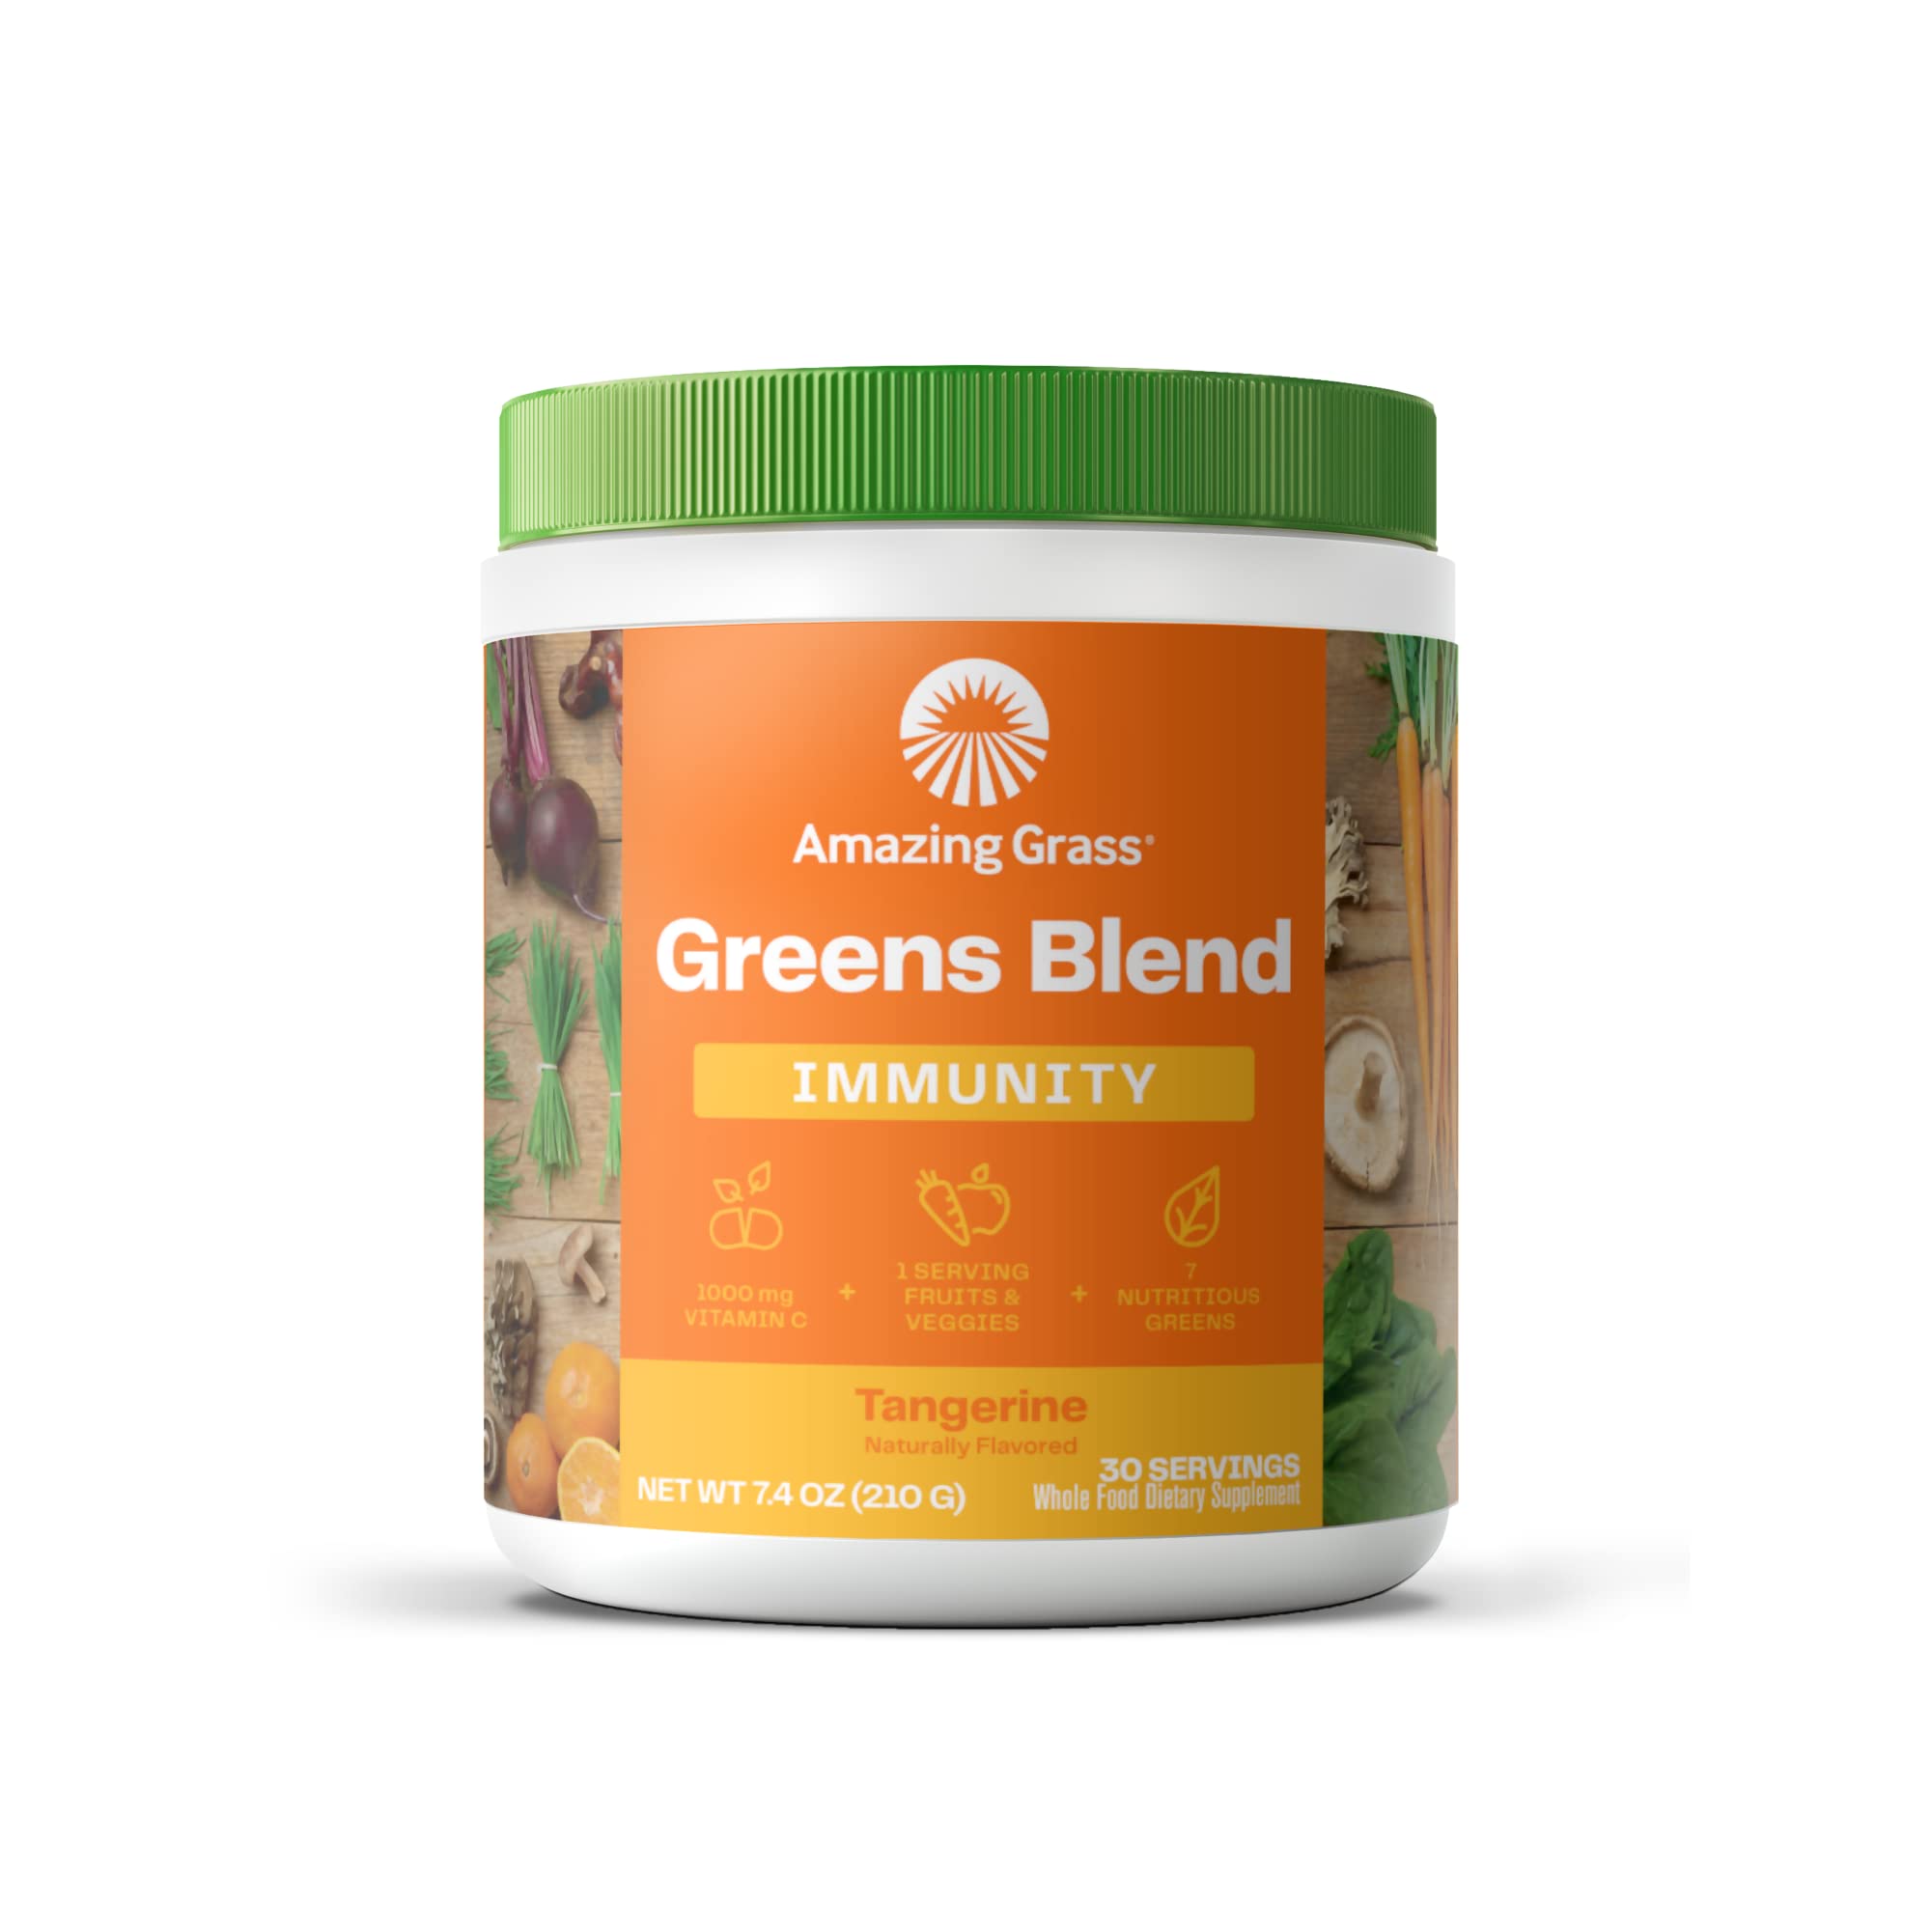 Amazing Grass Greens Blend Superfood for Immune Support: Super Greens Powder Smoothie Mix with Vitamin C, Cordyceps, Beet Root Powder & Reishi Mushrooms, Tangerine, 30 Servings